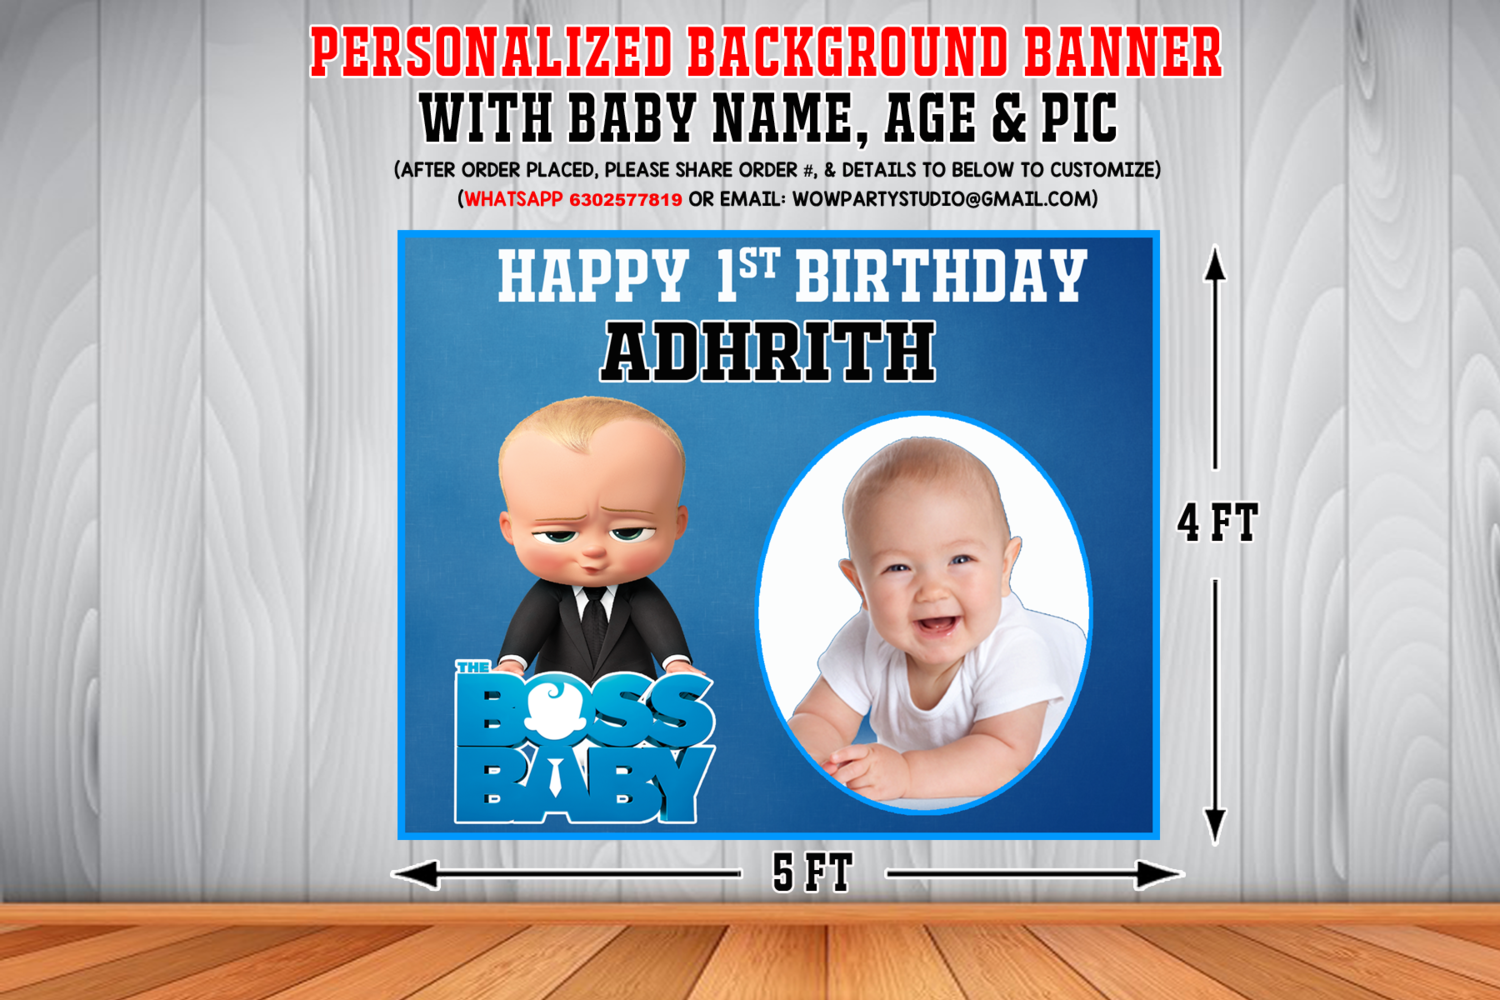 Personalized Boss Baby Birthday Backdrop Banner With Baby Picture (4ft x  5ft)